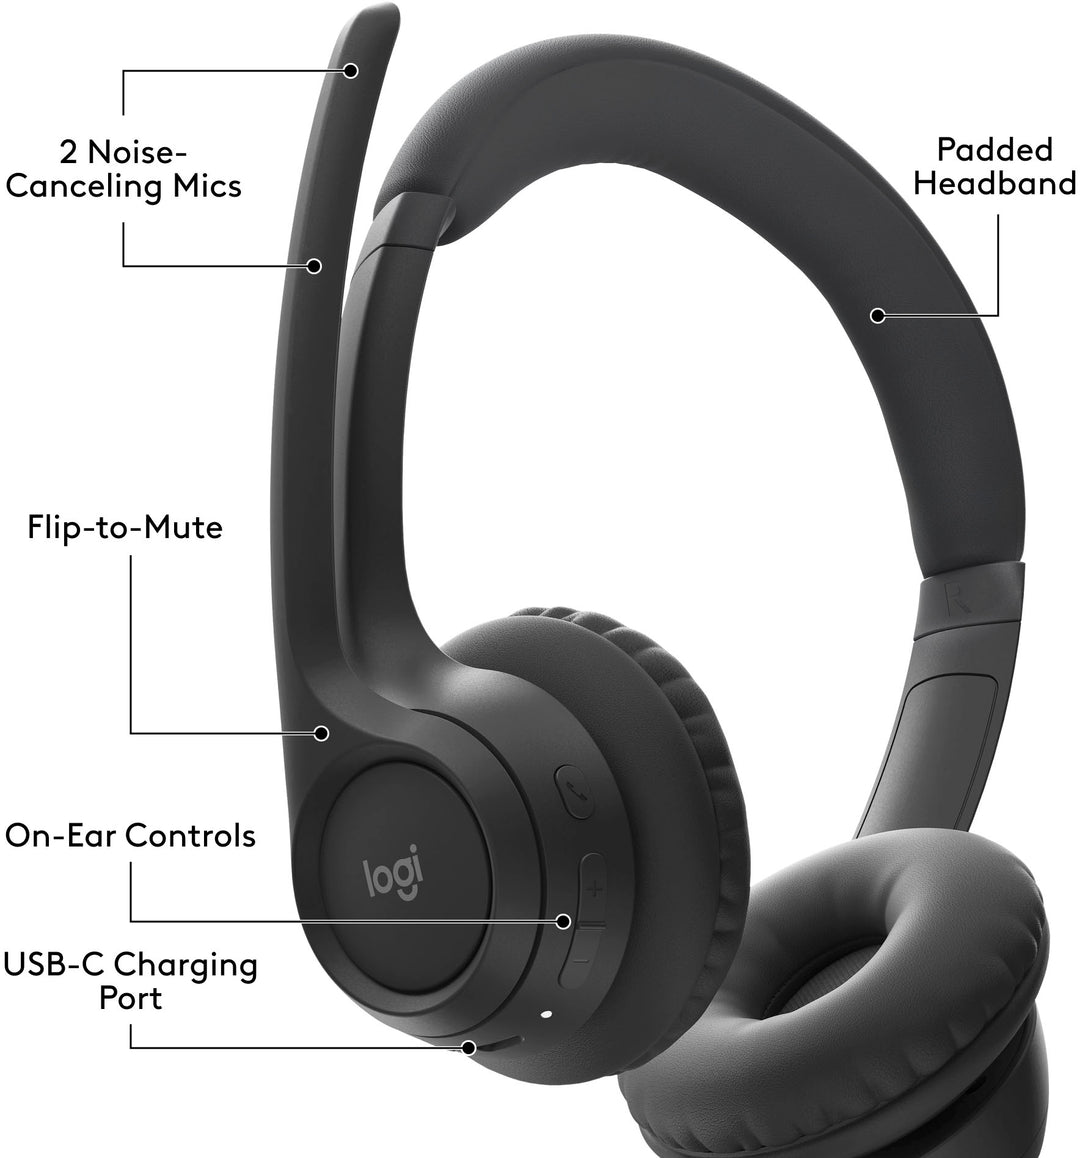 Logitech - Zone 300 Wireless Bluetooth On-ear Headset With Noise-Canceling Microphone - Black_5